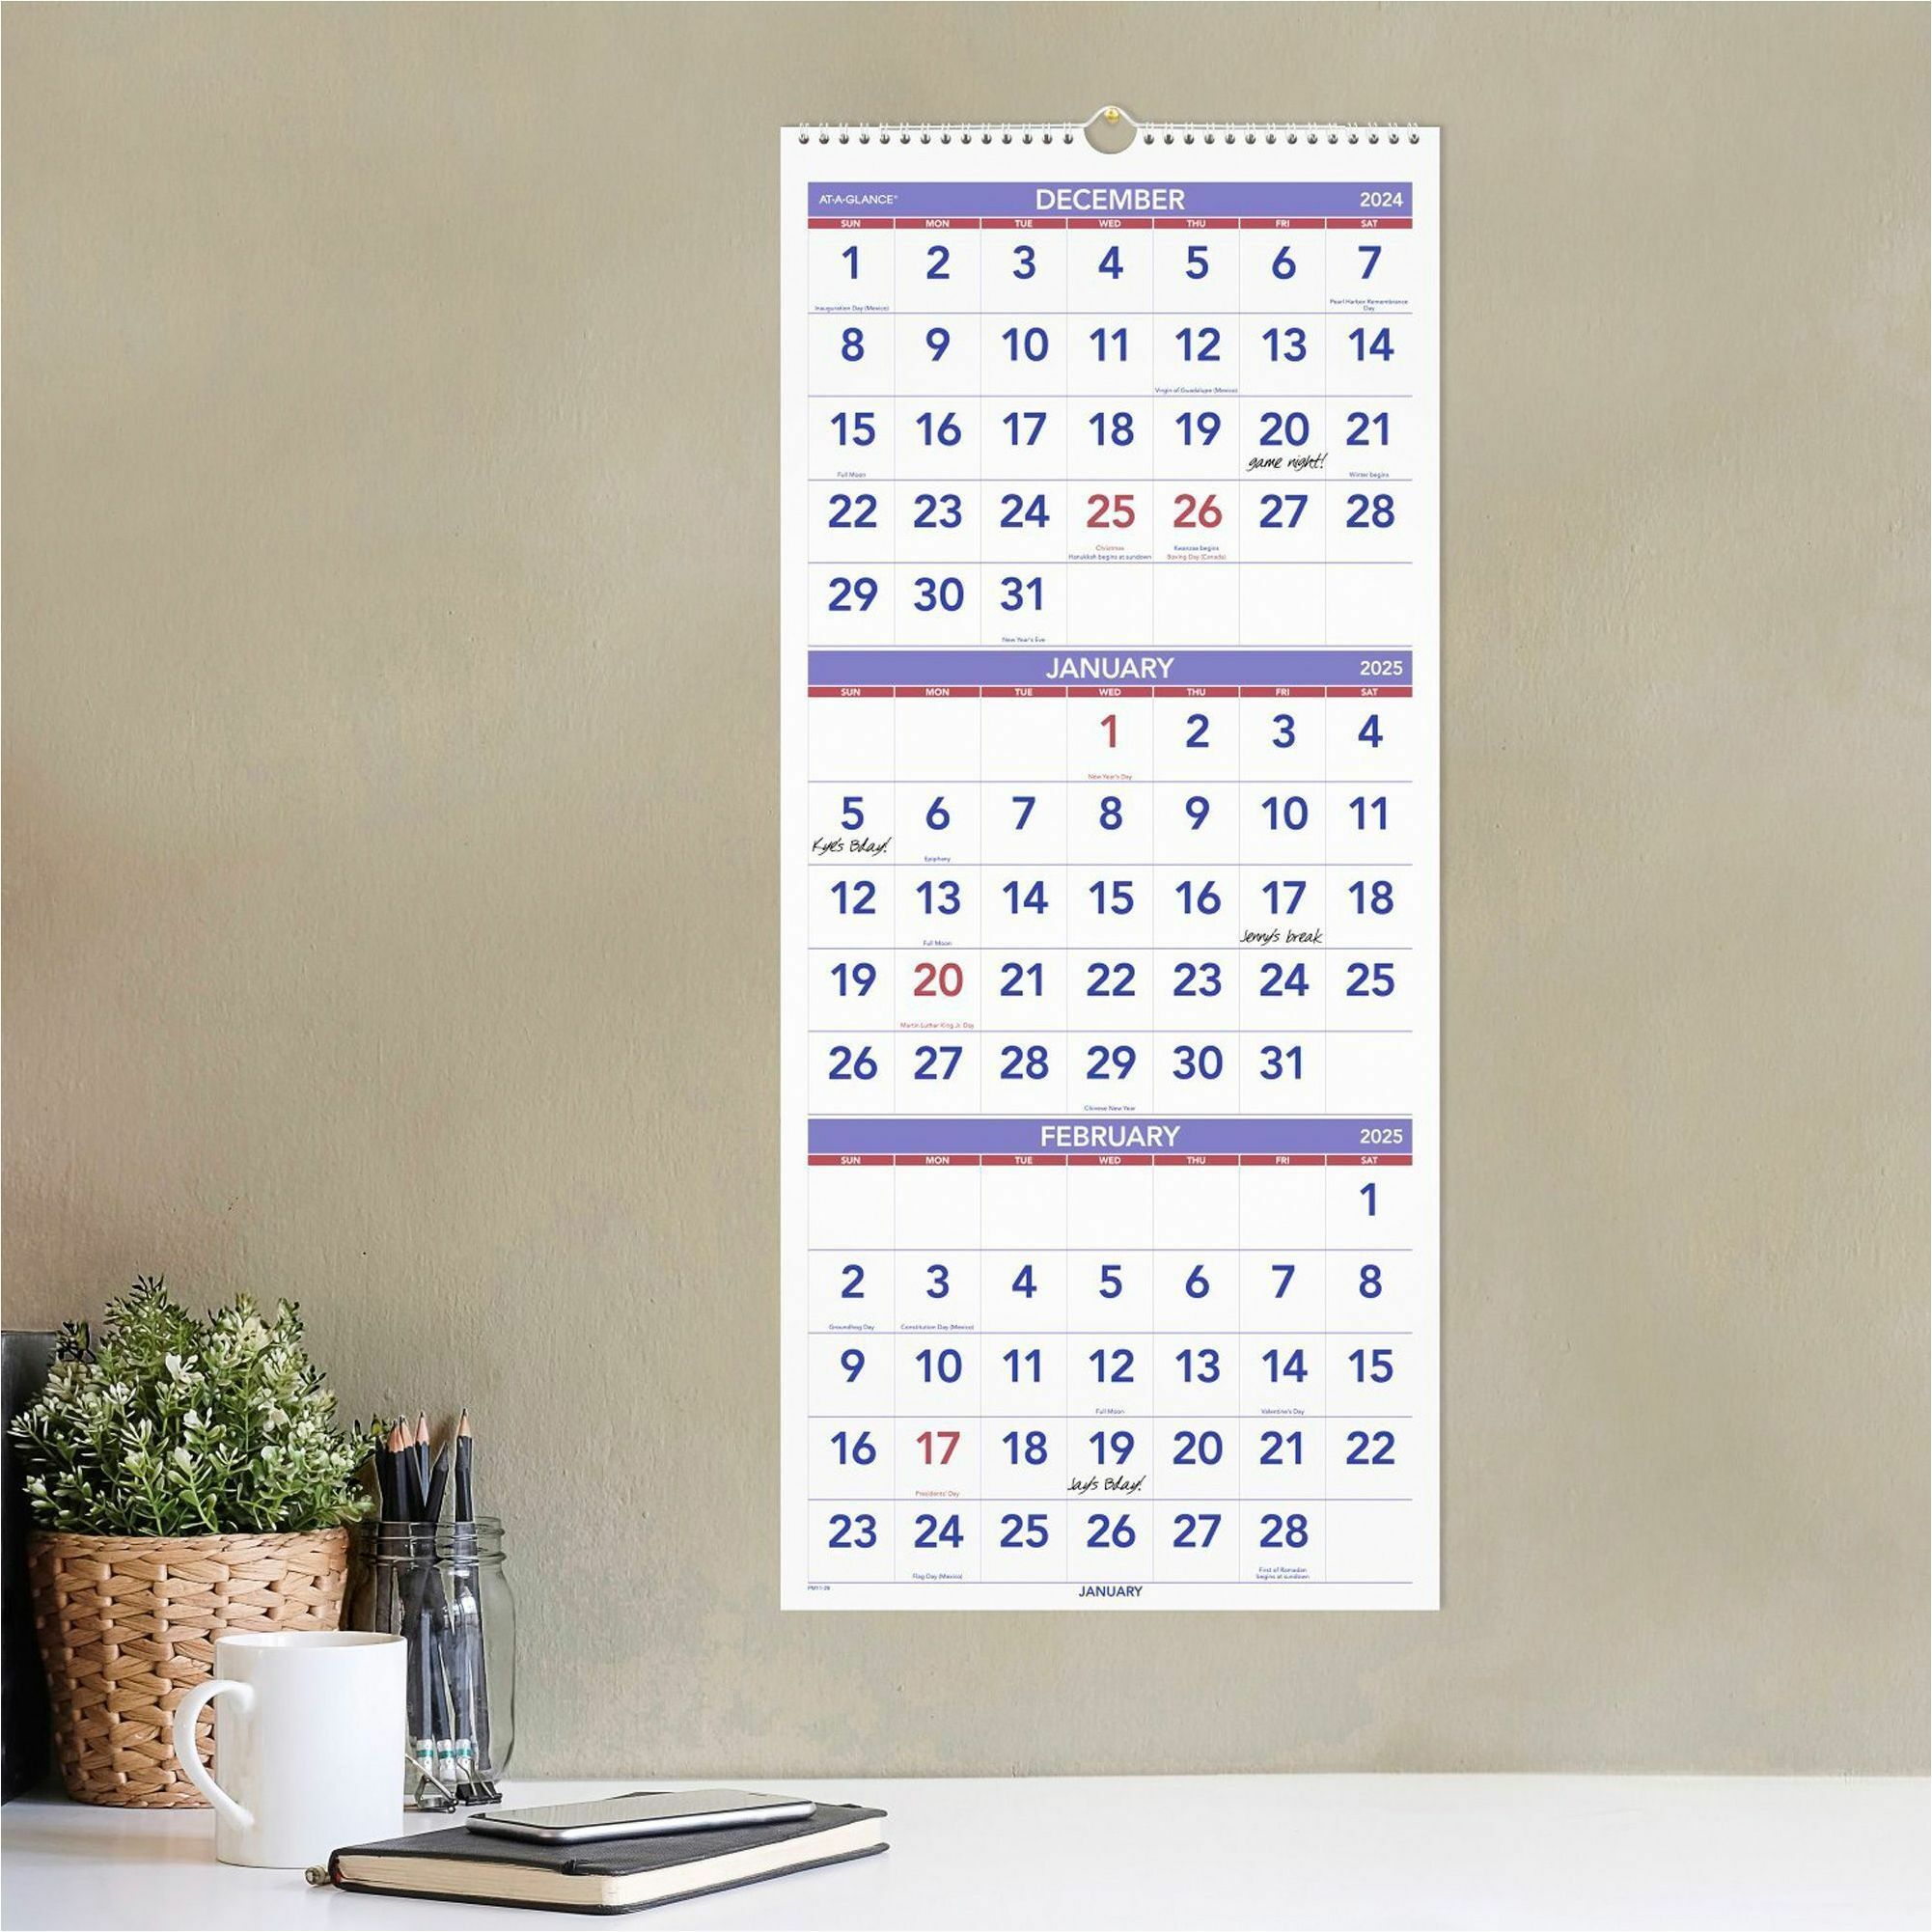 at-a-glance-3-month-reference-wall-calendar-monthly-14-month-december-2023-january-2025